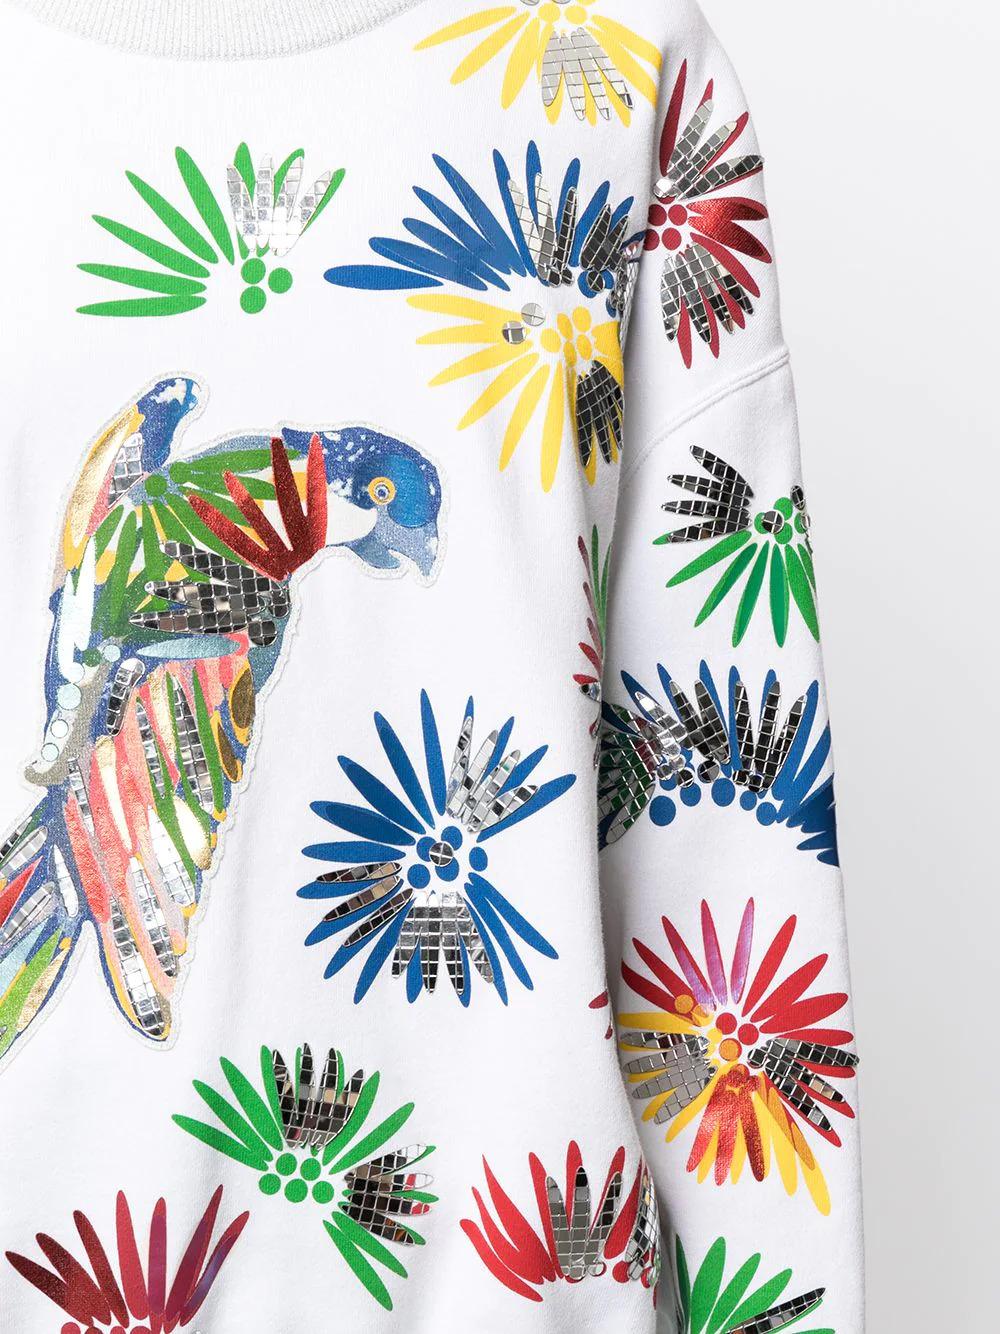 In 2017, Chanel hosted their Resort collection in Havana, inspired by the local culture. This vibrant piece from the collection features colourful parrots on white cotton, embellished with mirrored sequins. The crewneck pullover is in a straight